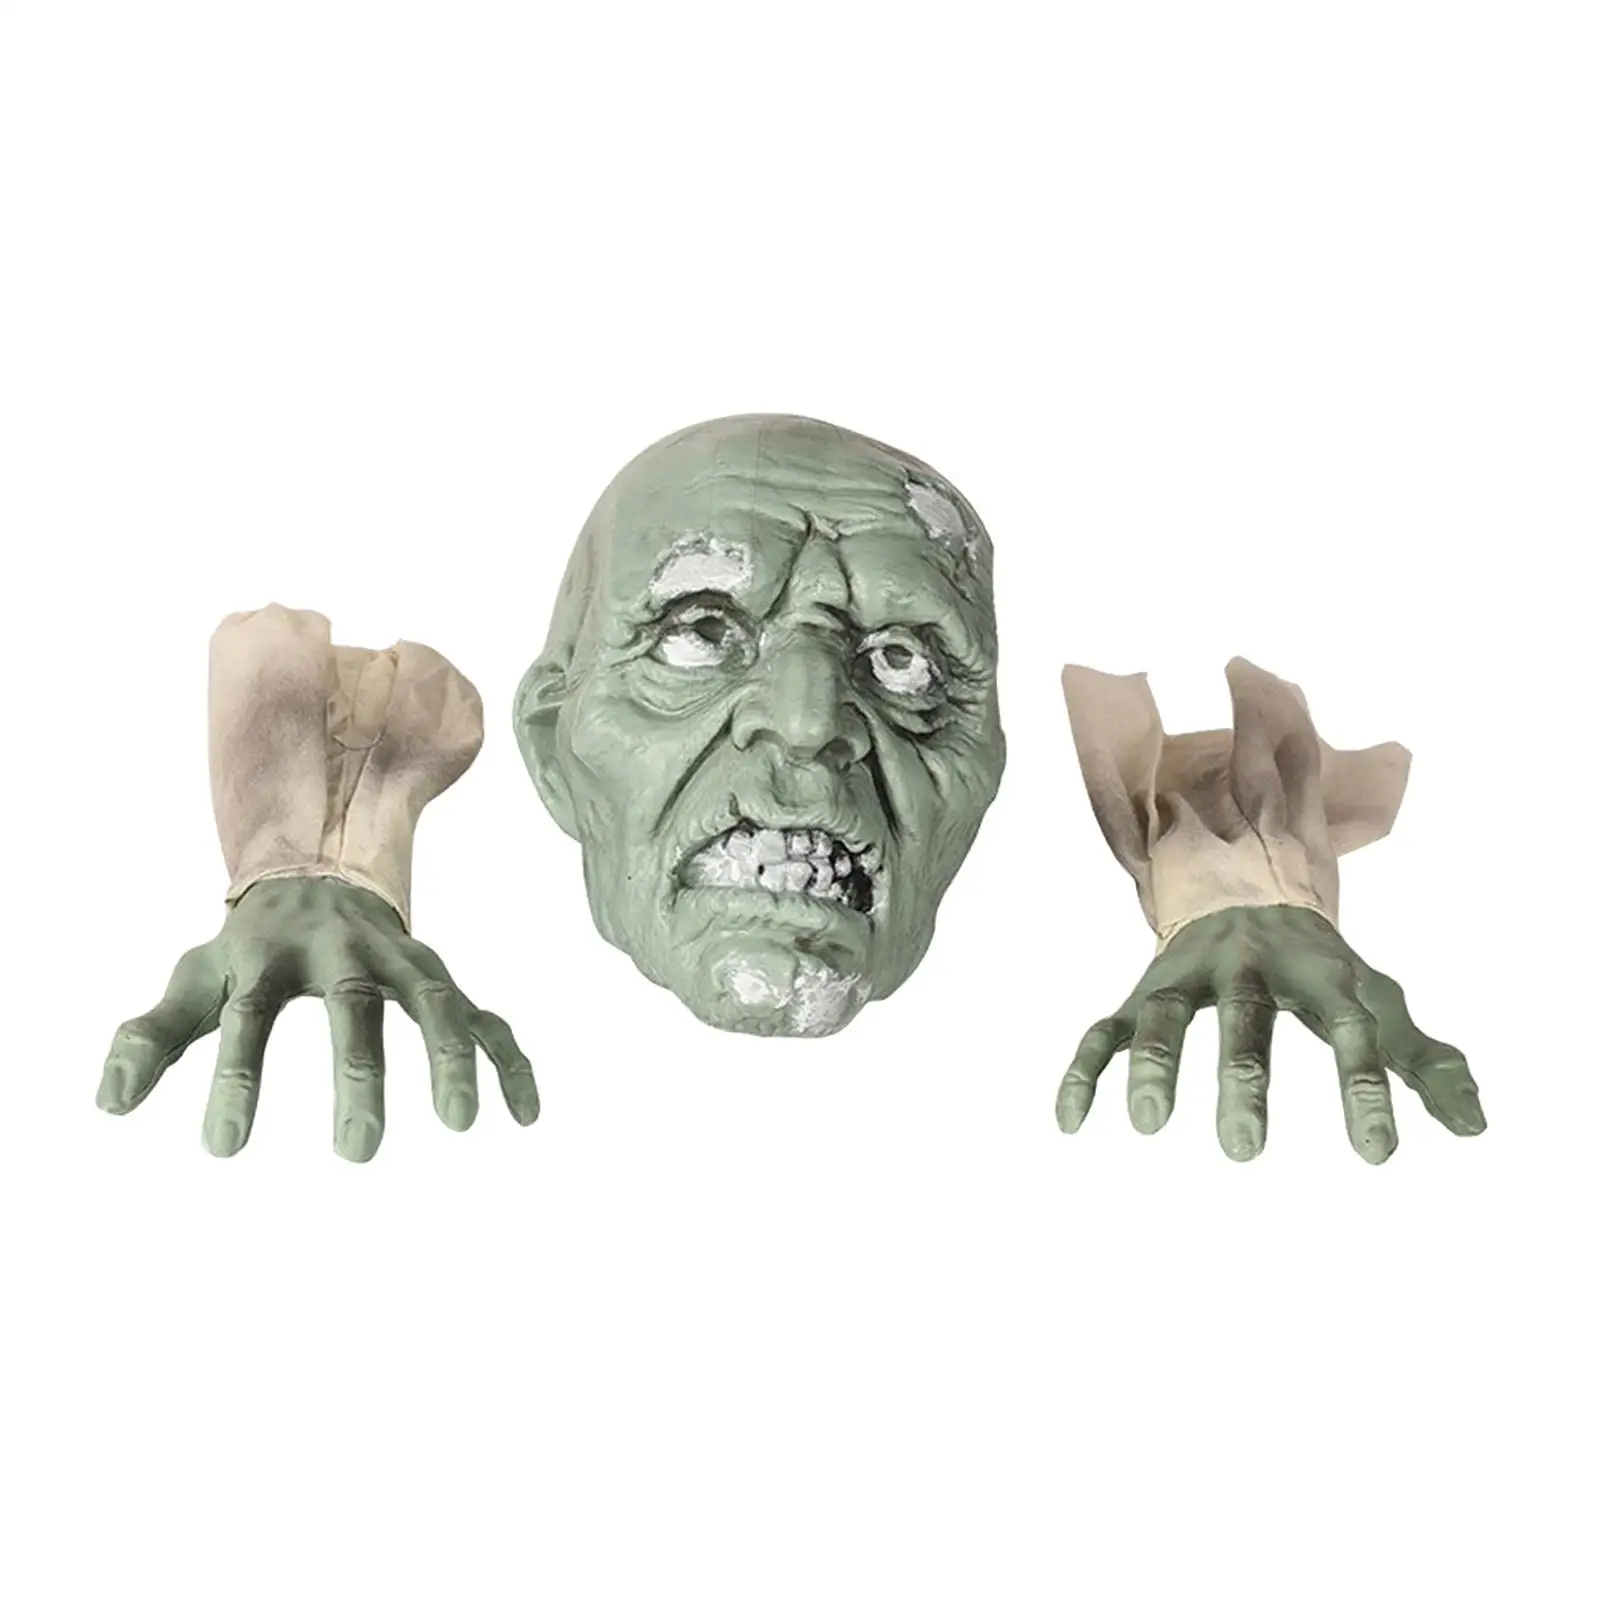 3pcs/Set Spooky Halloween Decorations Garden Lawn Zombie Head Hands Arms Ornament Scary Photographing Props